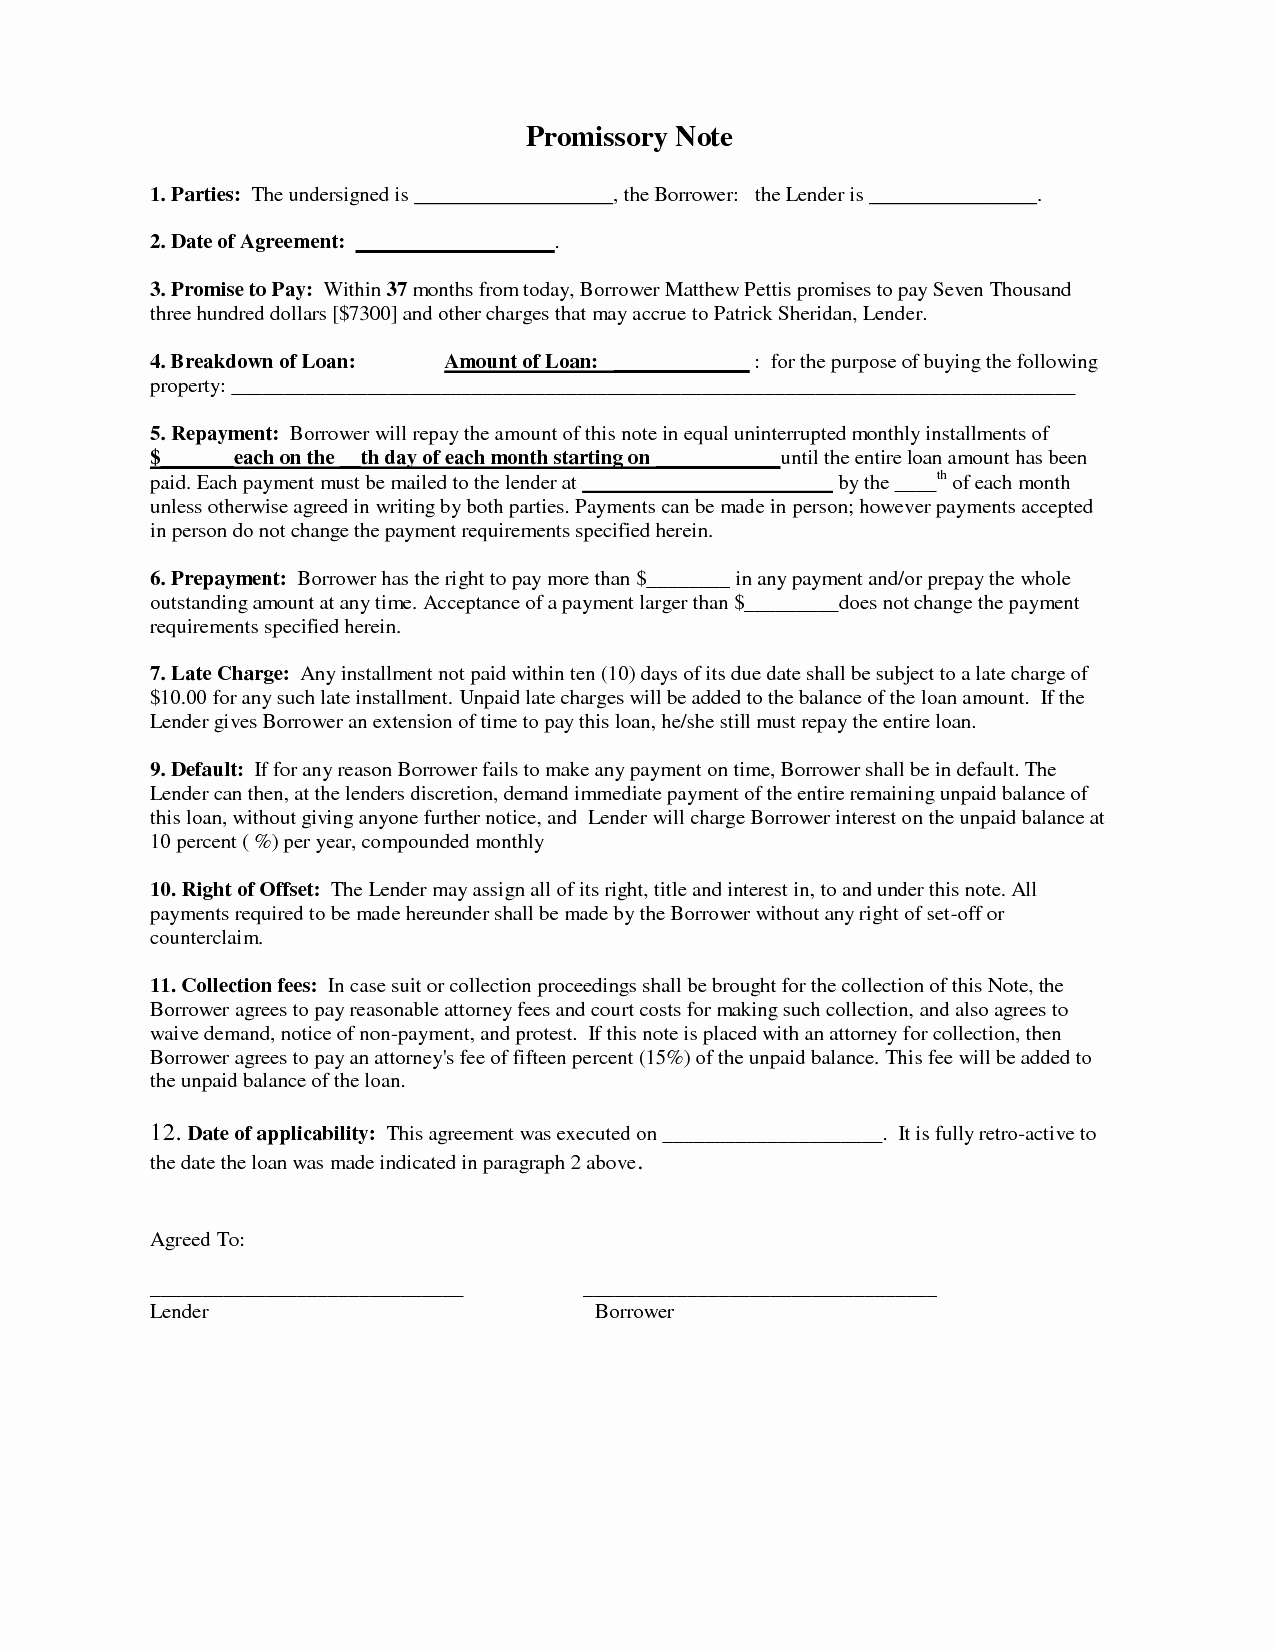 Demand Letter Promissory Note Template - Sample Promissory Note for Business Loan Inspirational Sample